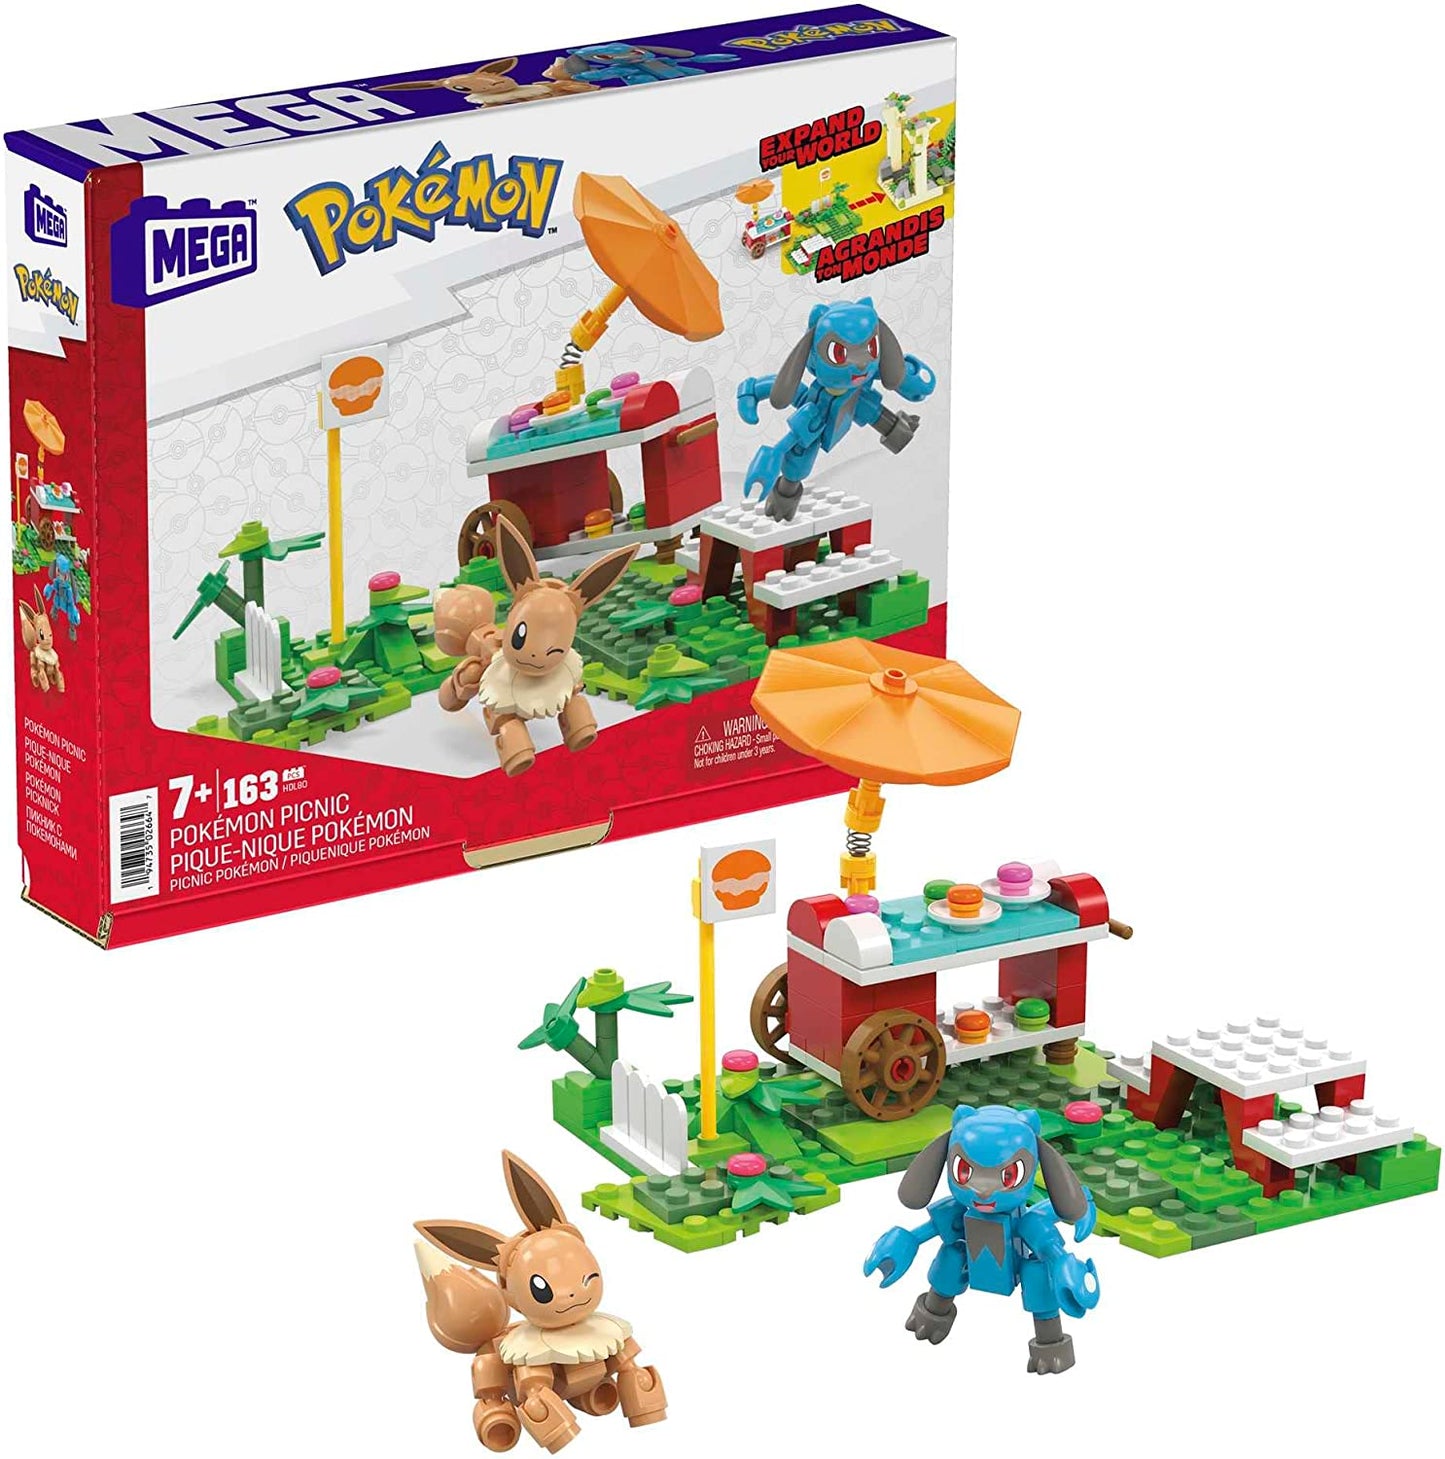 Pokémon Picnic With 193 Pieces, 2 Poseable Characters, Eevee and Riolu